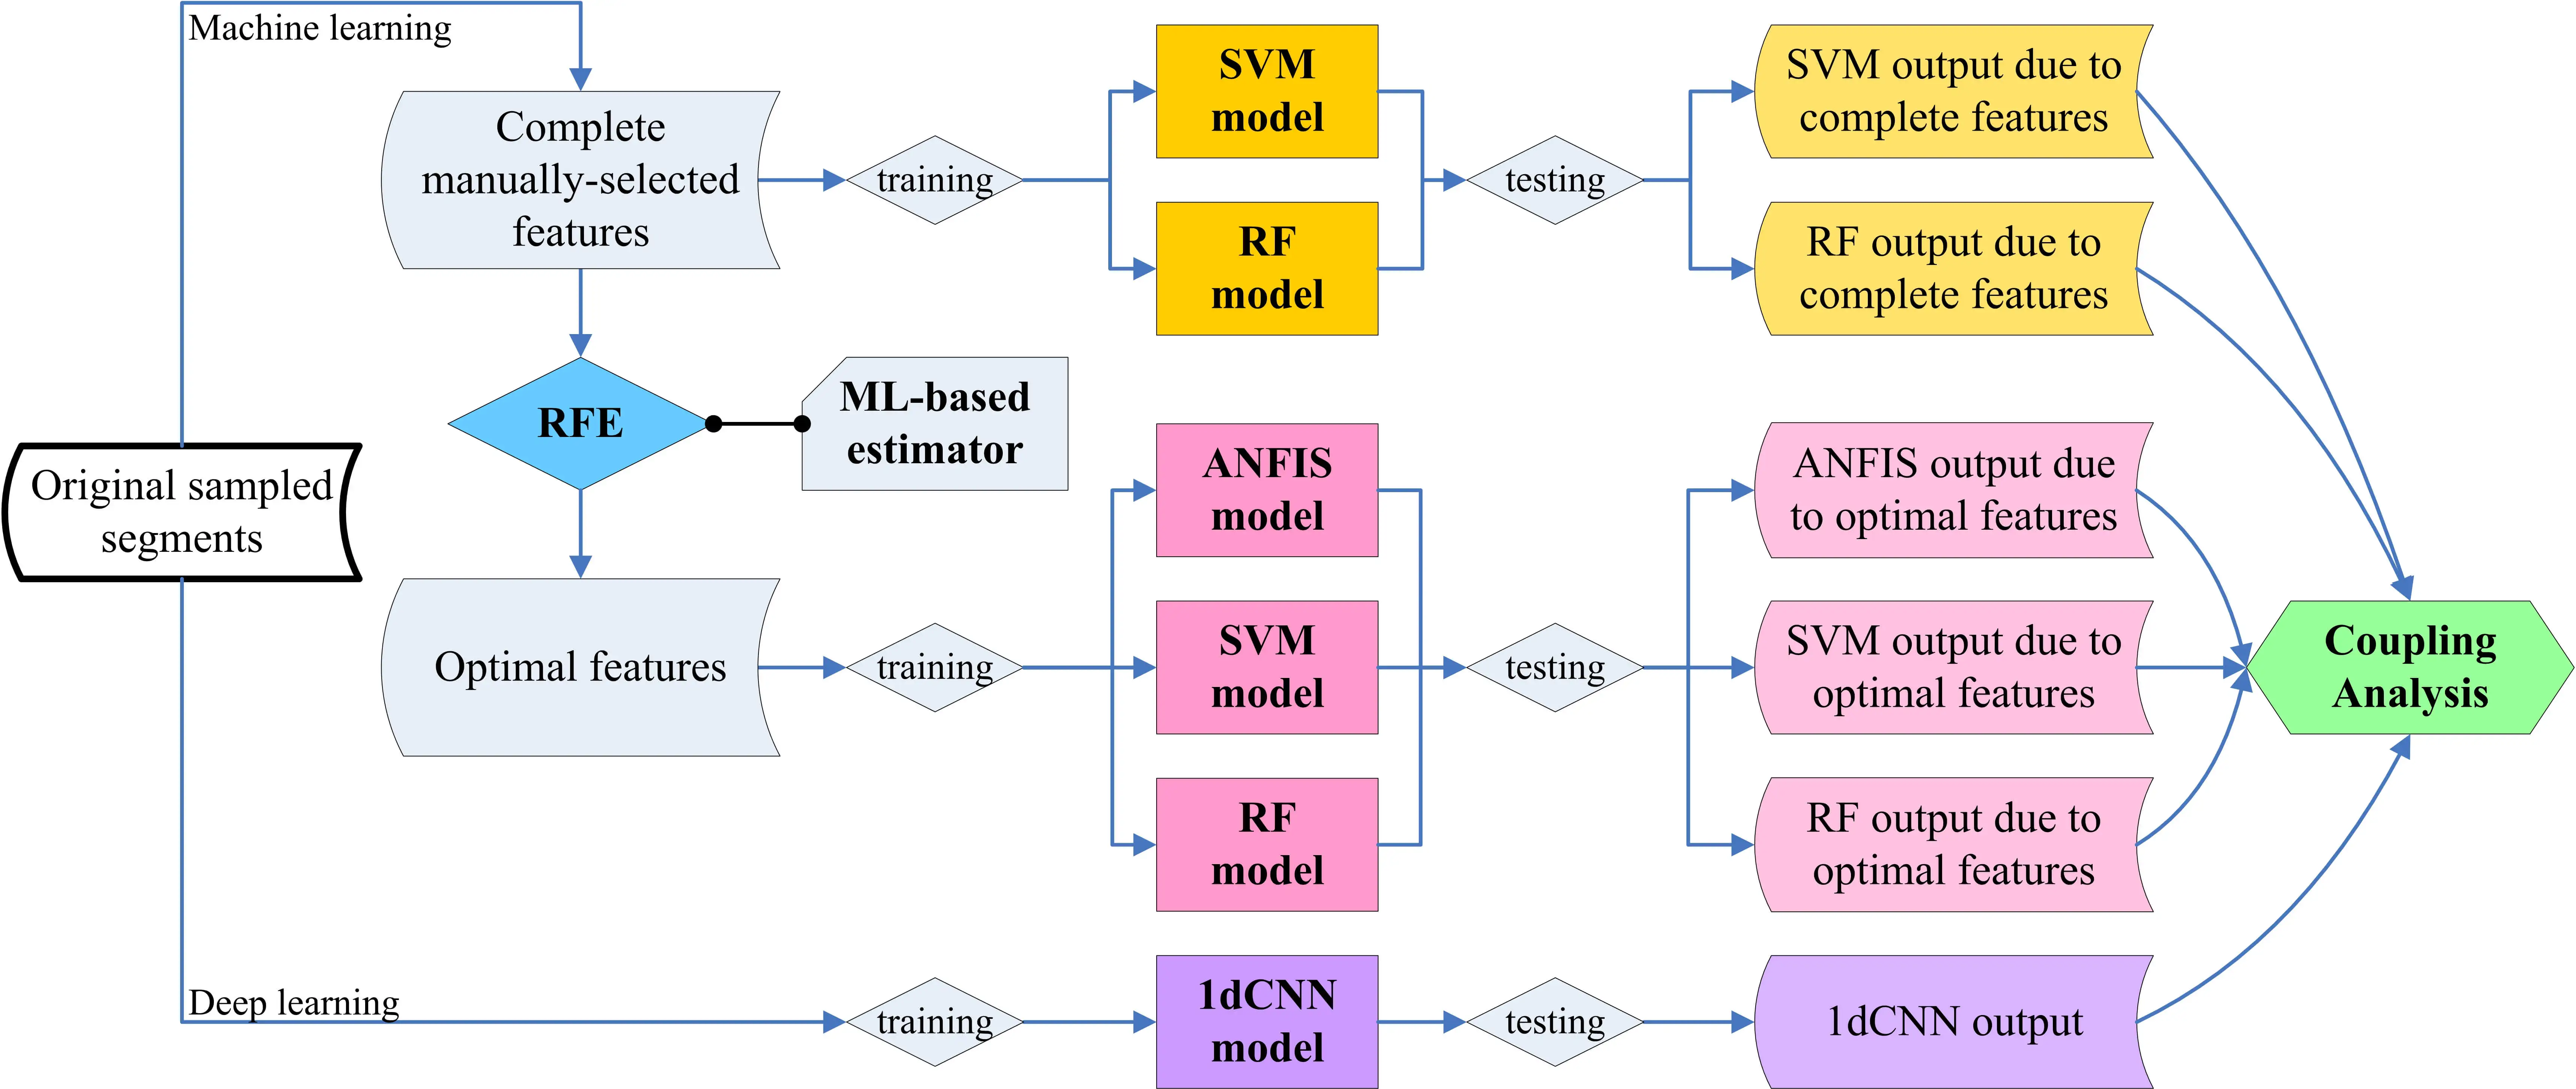 Coupling Analysis of Multiple Machine Learning Models for Human Activity Recognition